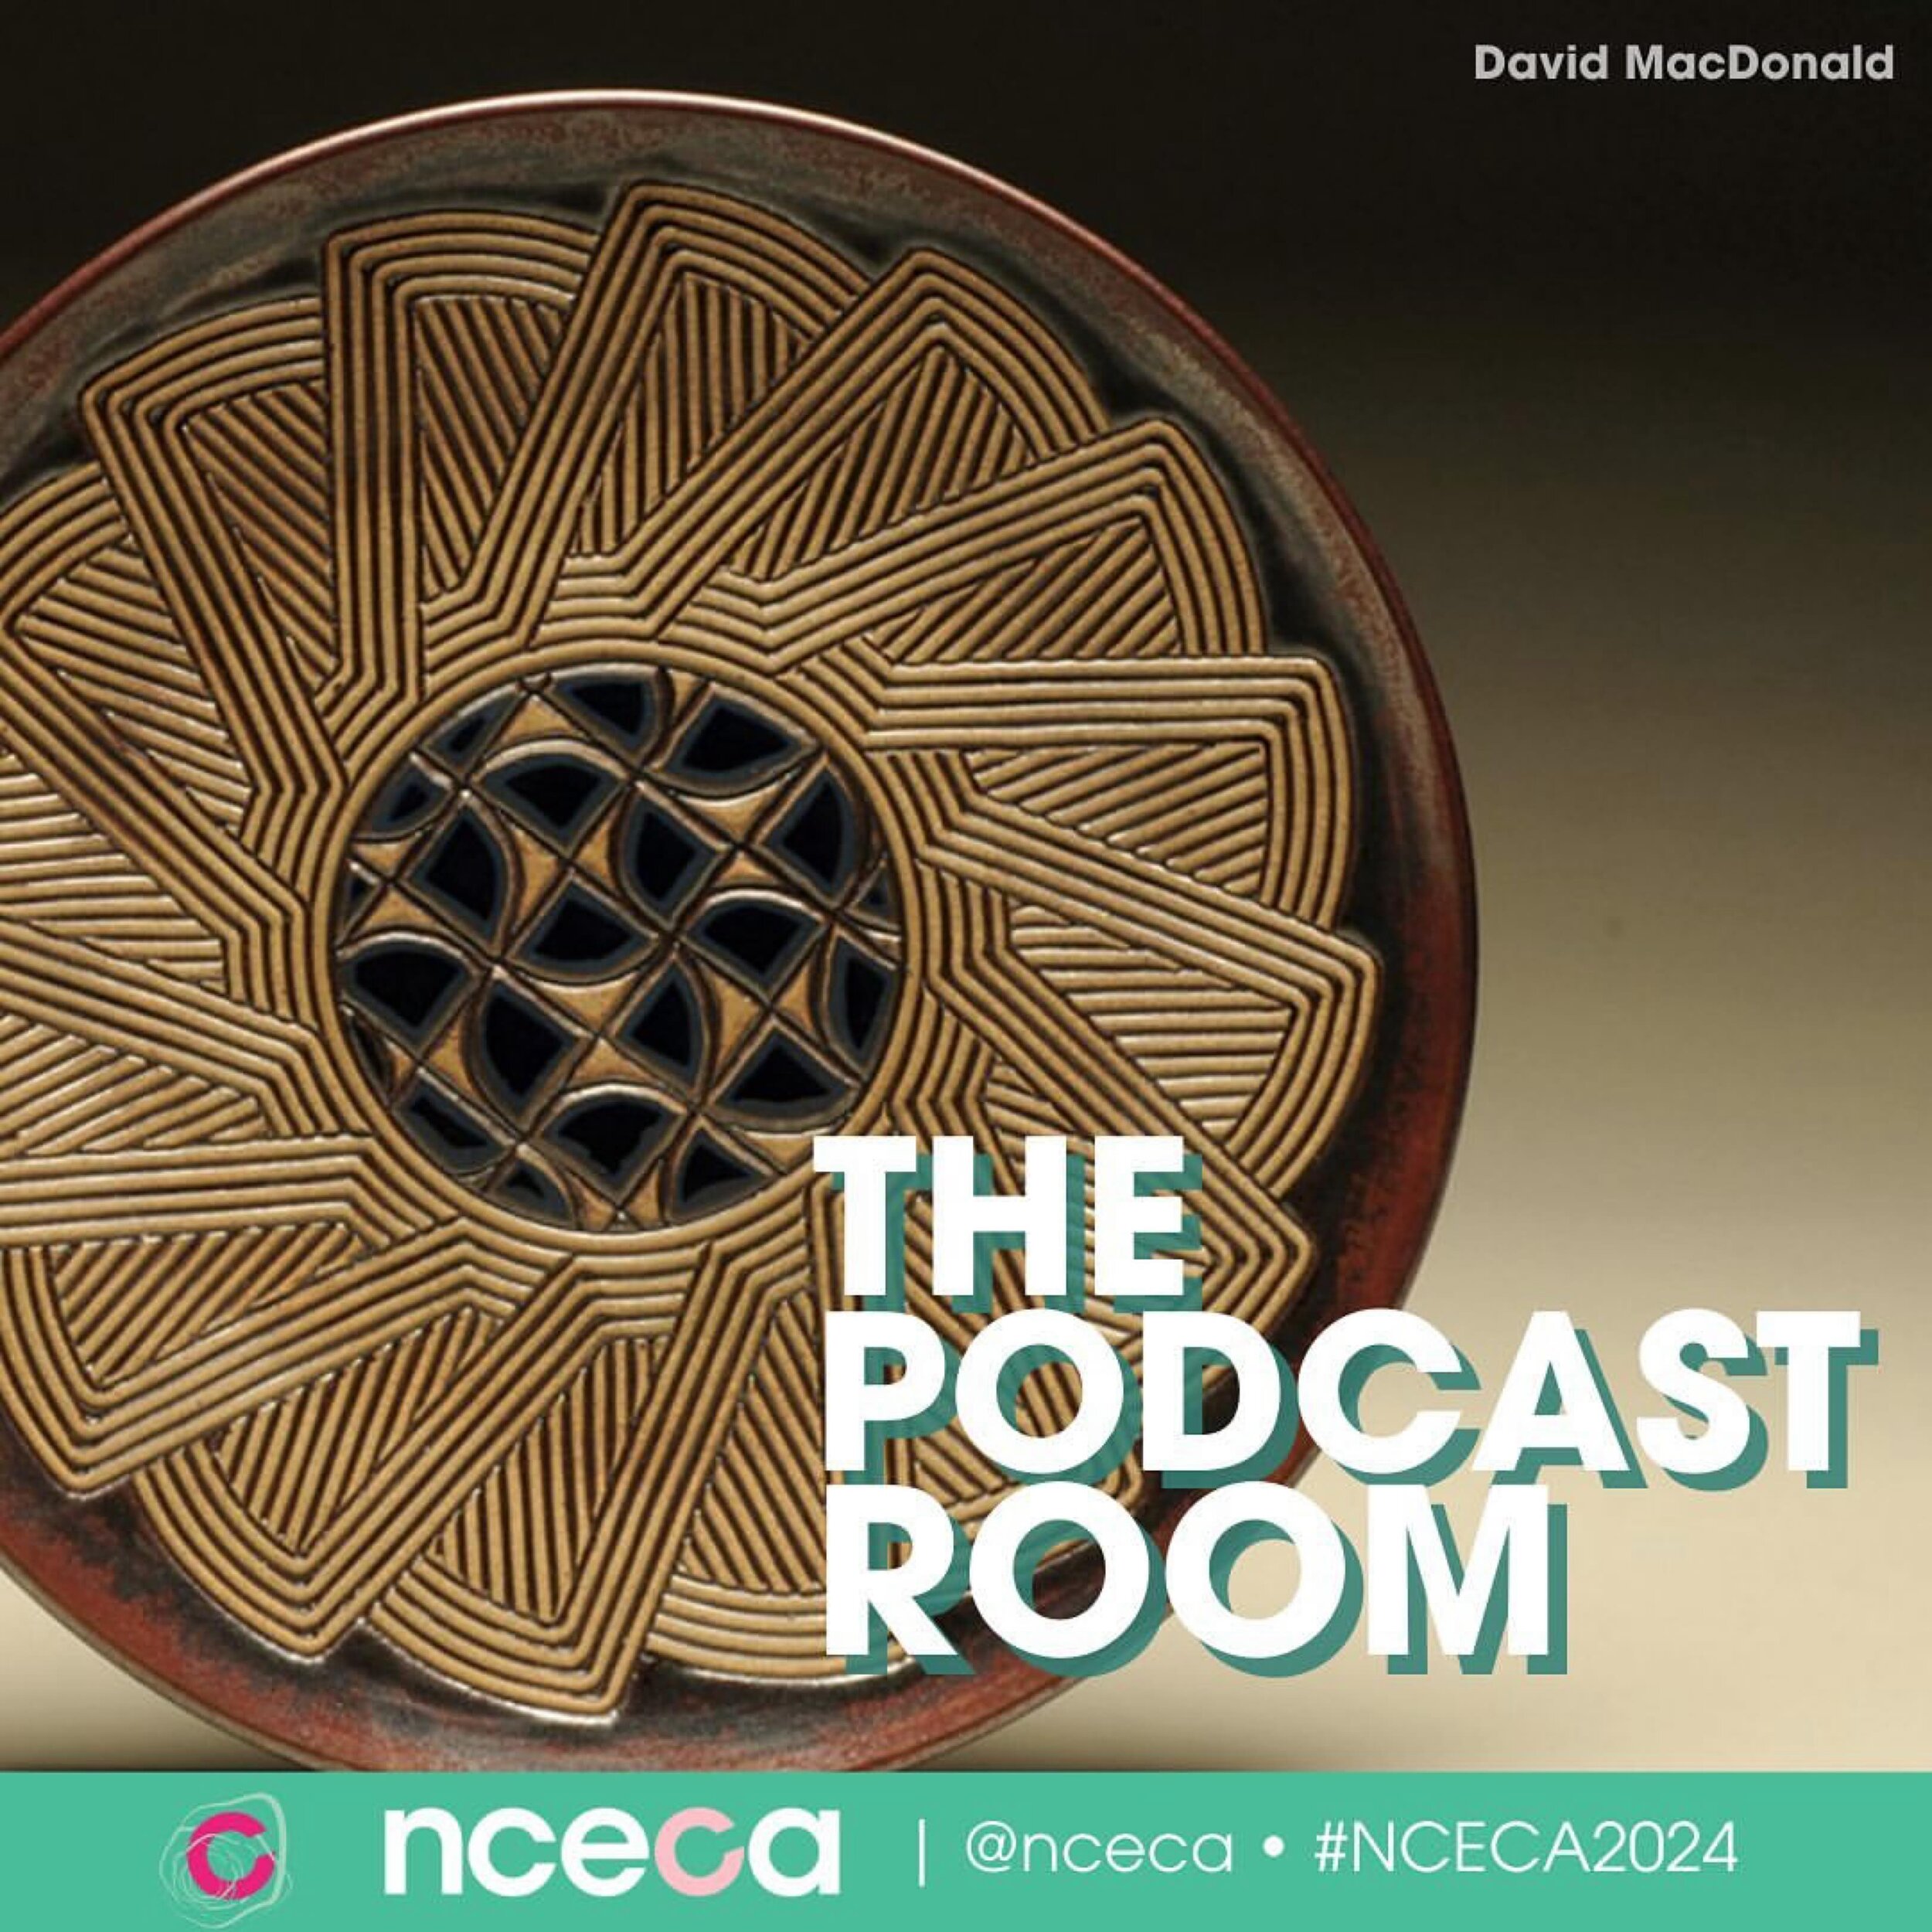 Excited to be part of the @nceca podcast room this year. 
・・・
Join hosts of popular ceramic podcasts for hour-long taping sessions on Thursday and Friday afternoons. The hosts encourage your input during the Q&amp;A at the end of each session.

2024 